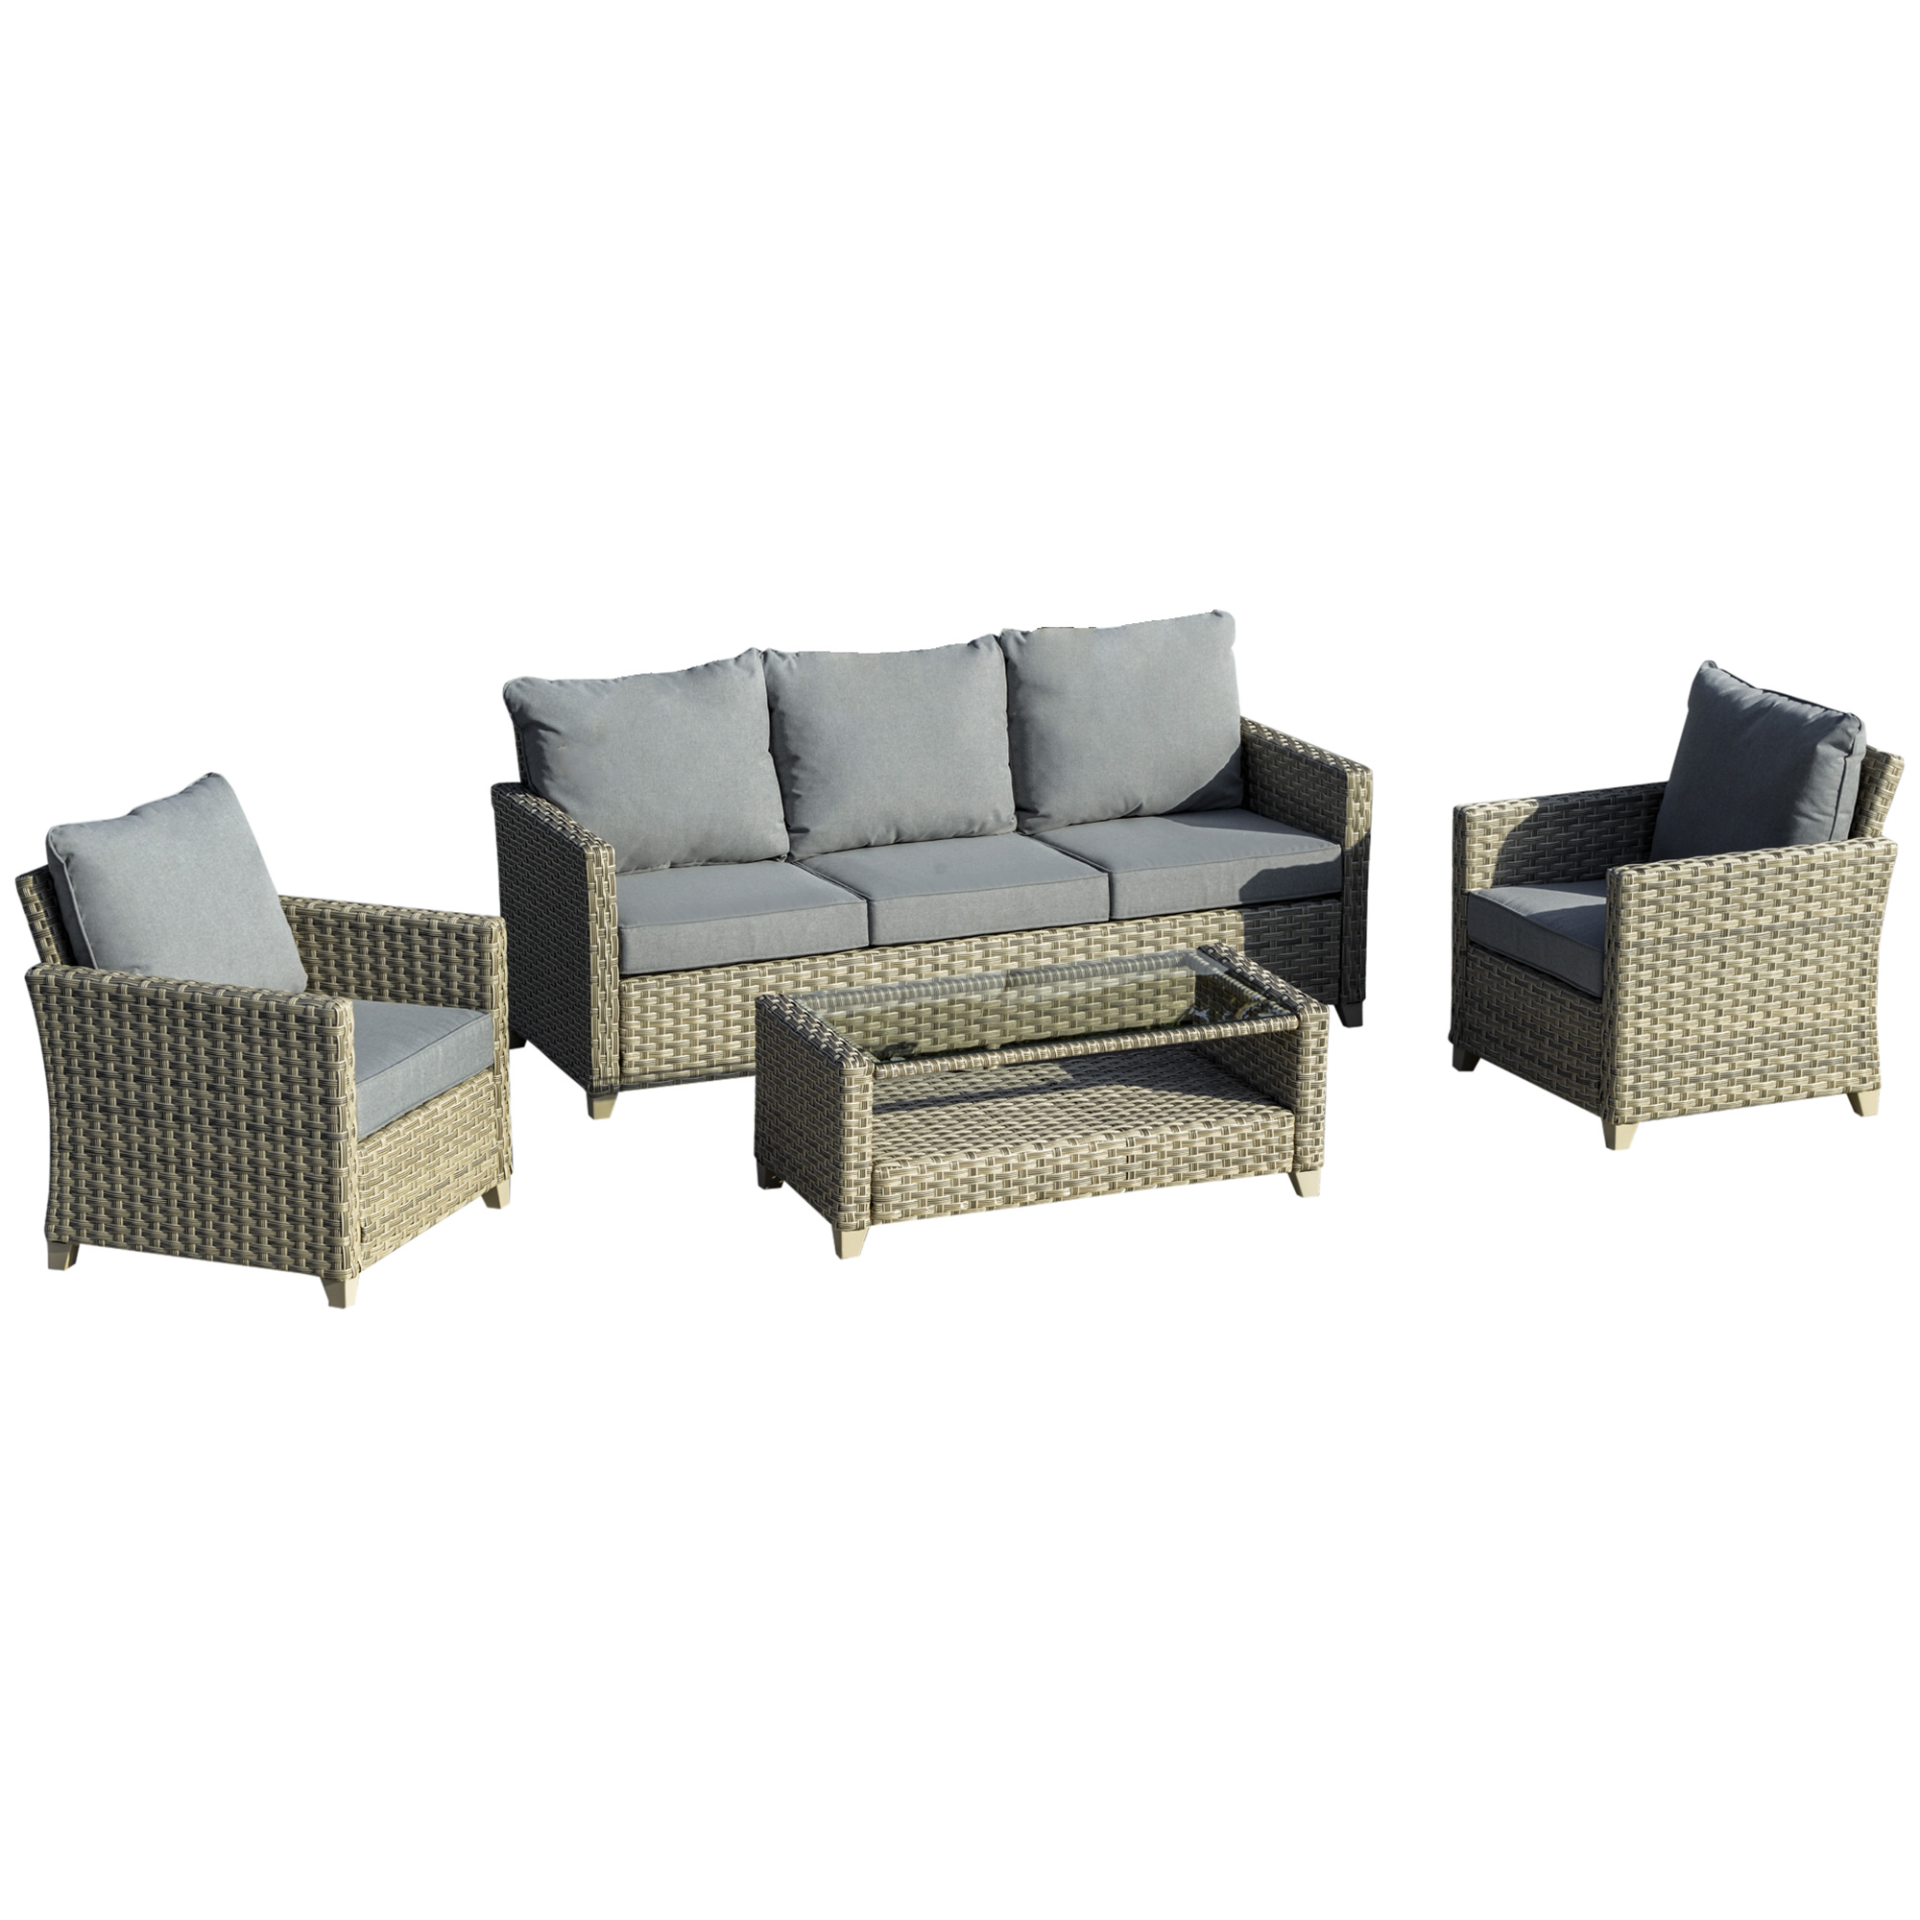 Outsunny 4 Pieces Patio Wicker Sofa Set, Outdoor PE Rattan Sectional Conversation Aluminium Frame Furniture Set w/ Padded Cushion & 2-Tier Tea Table, Brown